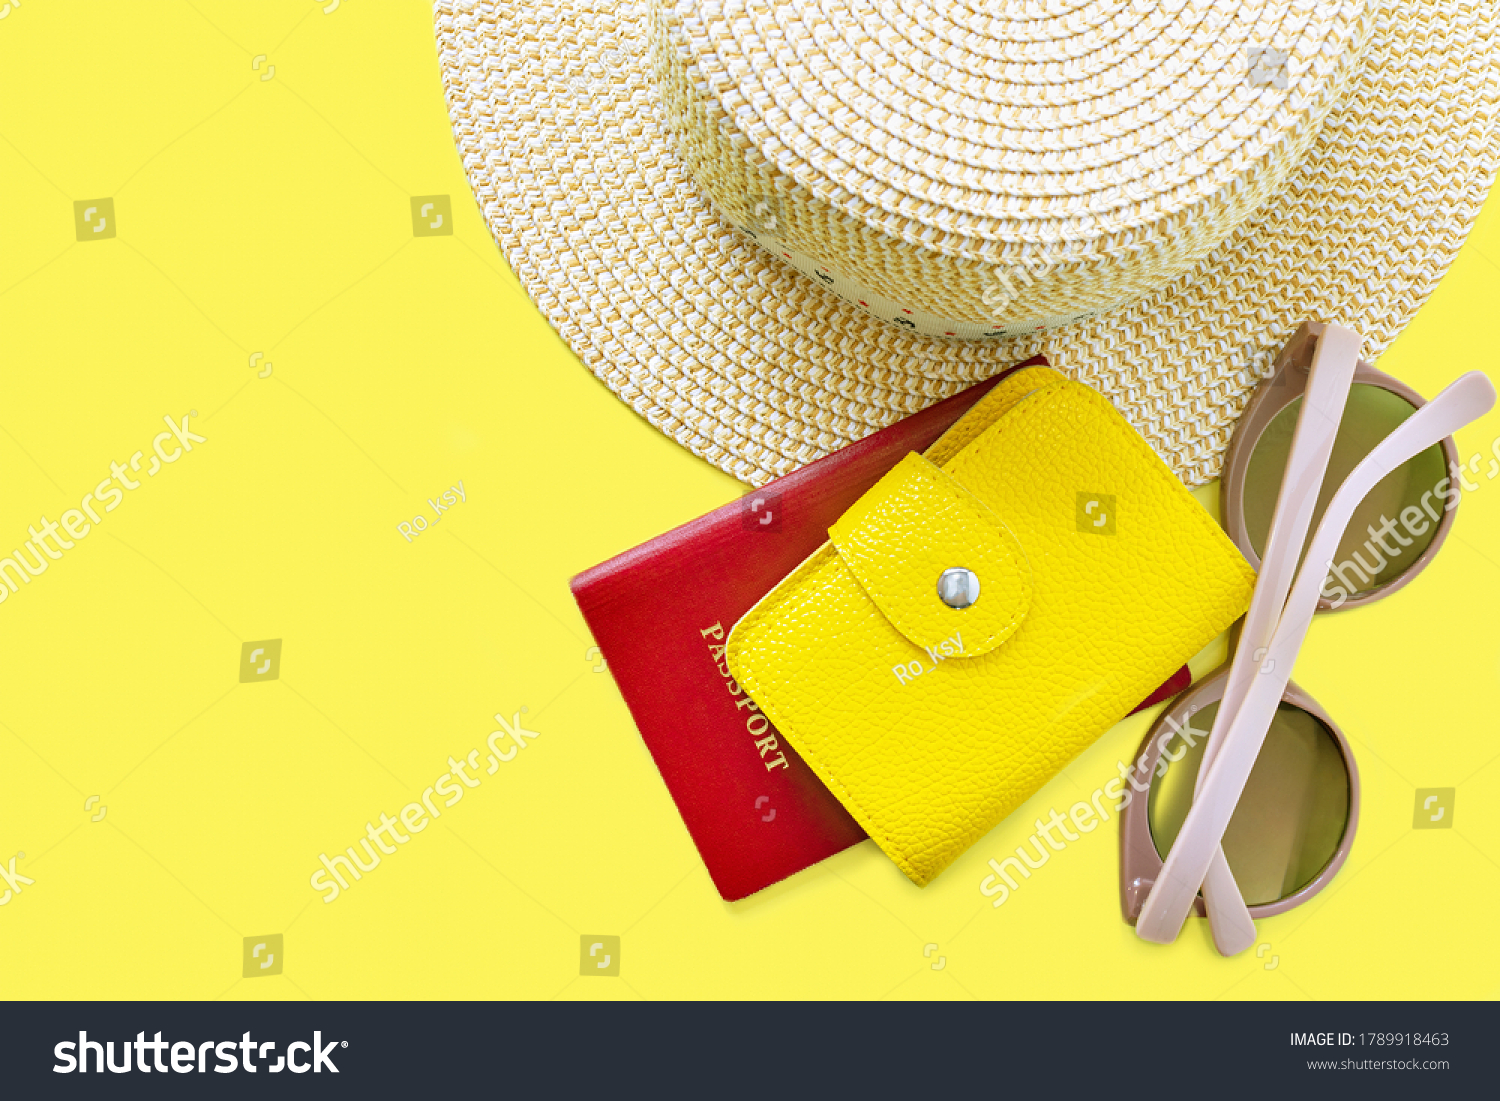 Top view of hat, sunglasses and pasport with leather purse. Summer vacation background. Summertime, travel, beach, relax, tourism concept. Yellow background with copy space. #1789918463